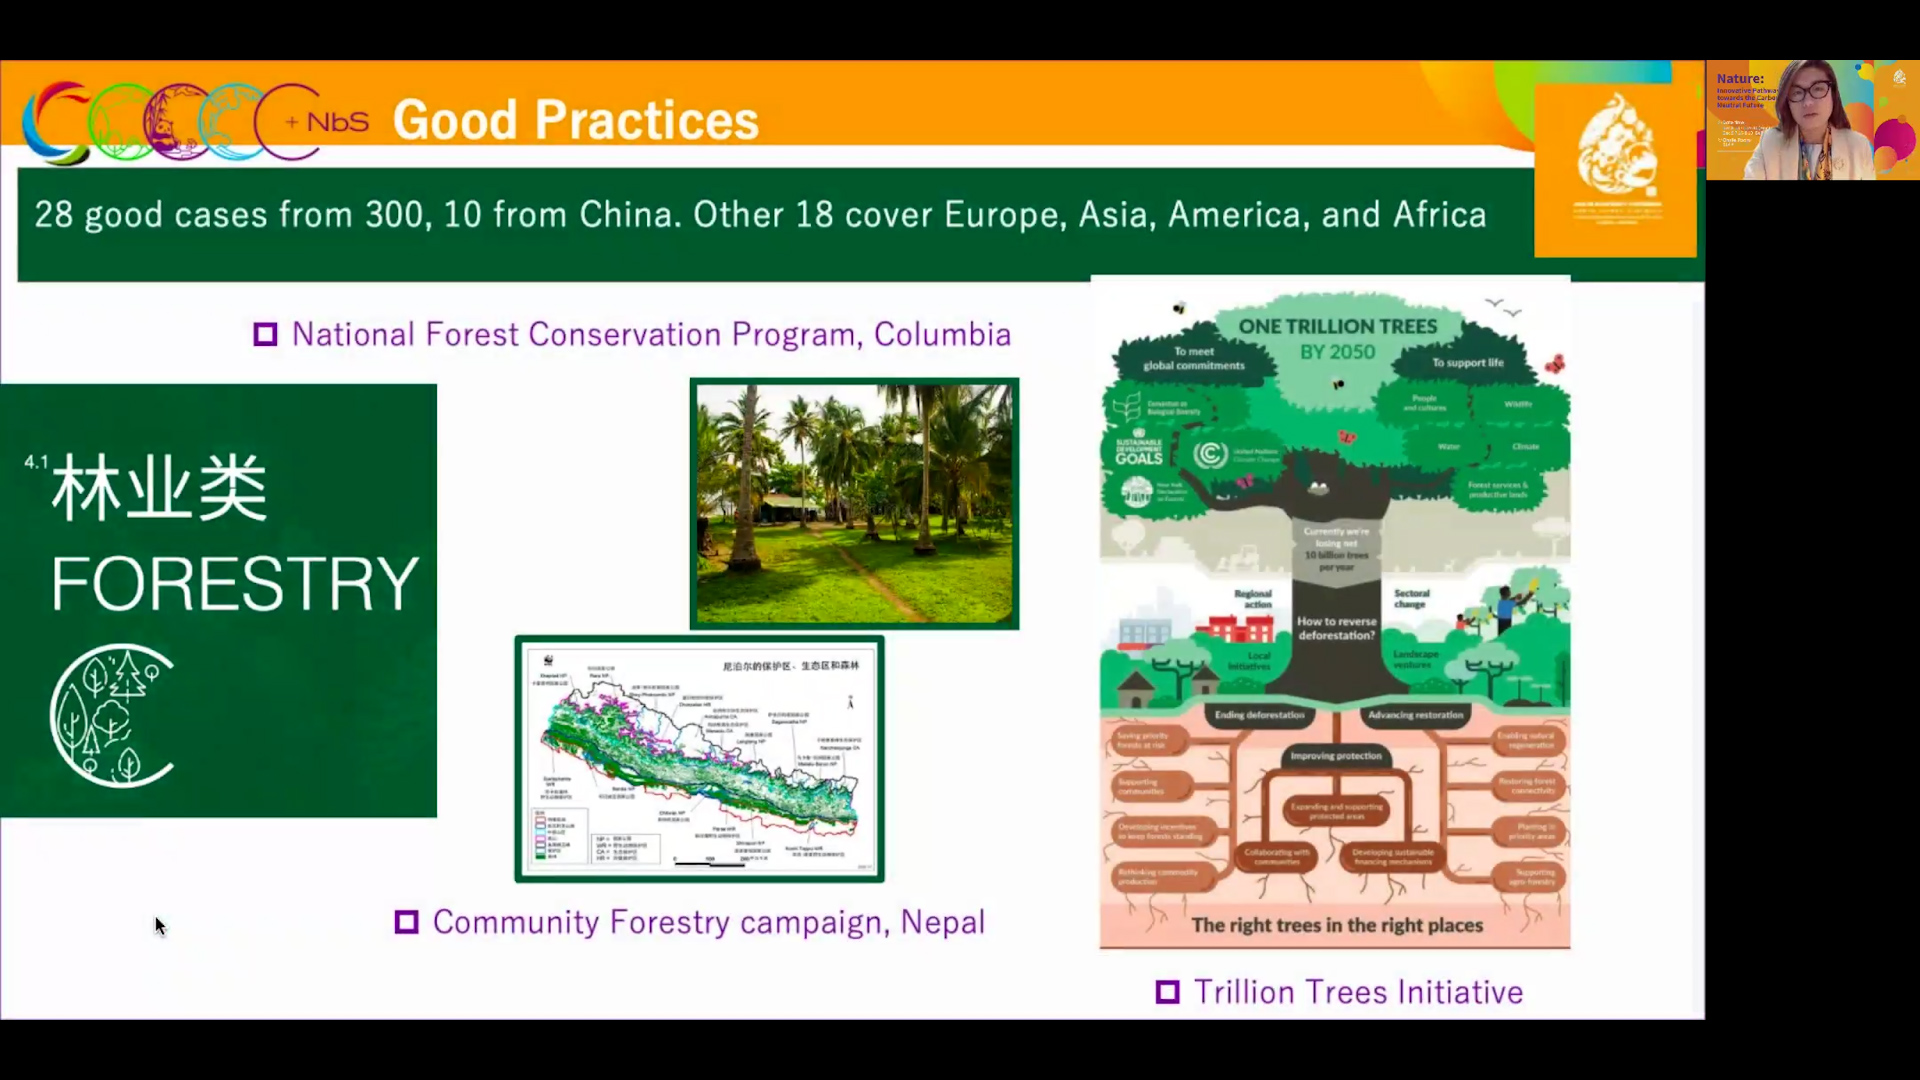 Dr. Wang Binbin gave keynote speech on the good practices on Nature-based Solutions.
Source: ICCSD
